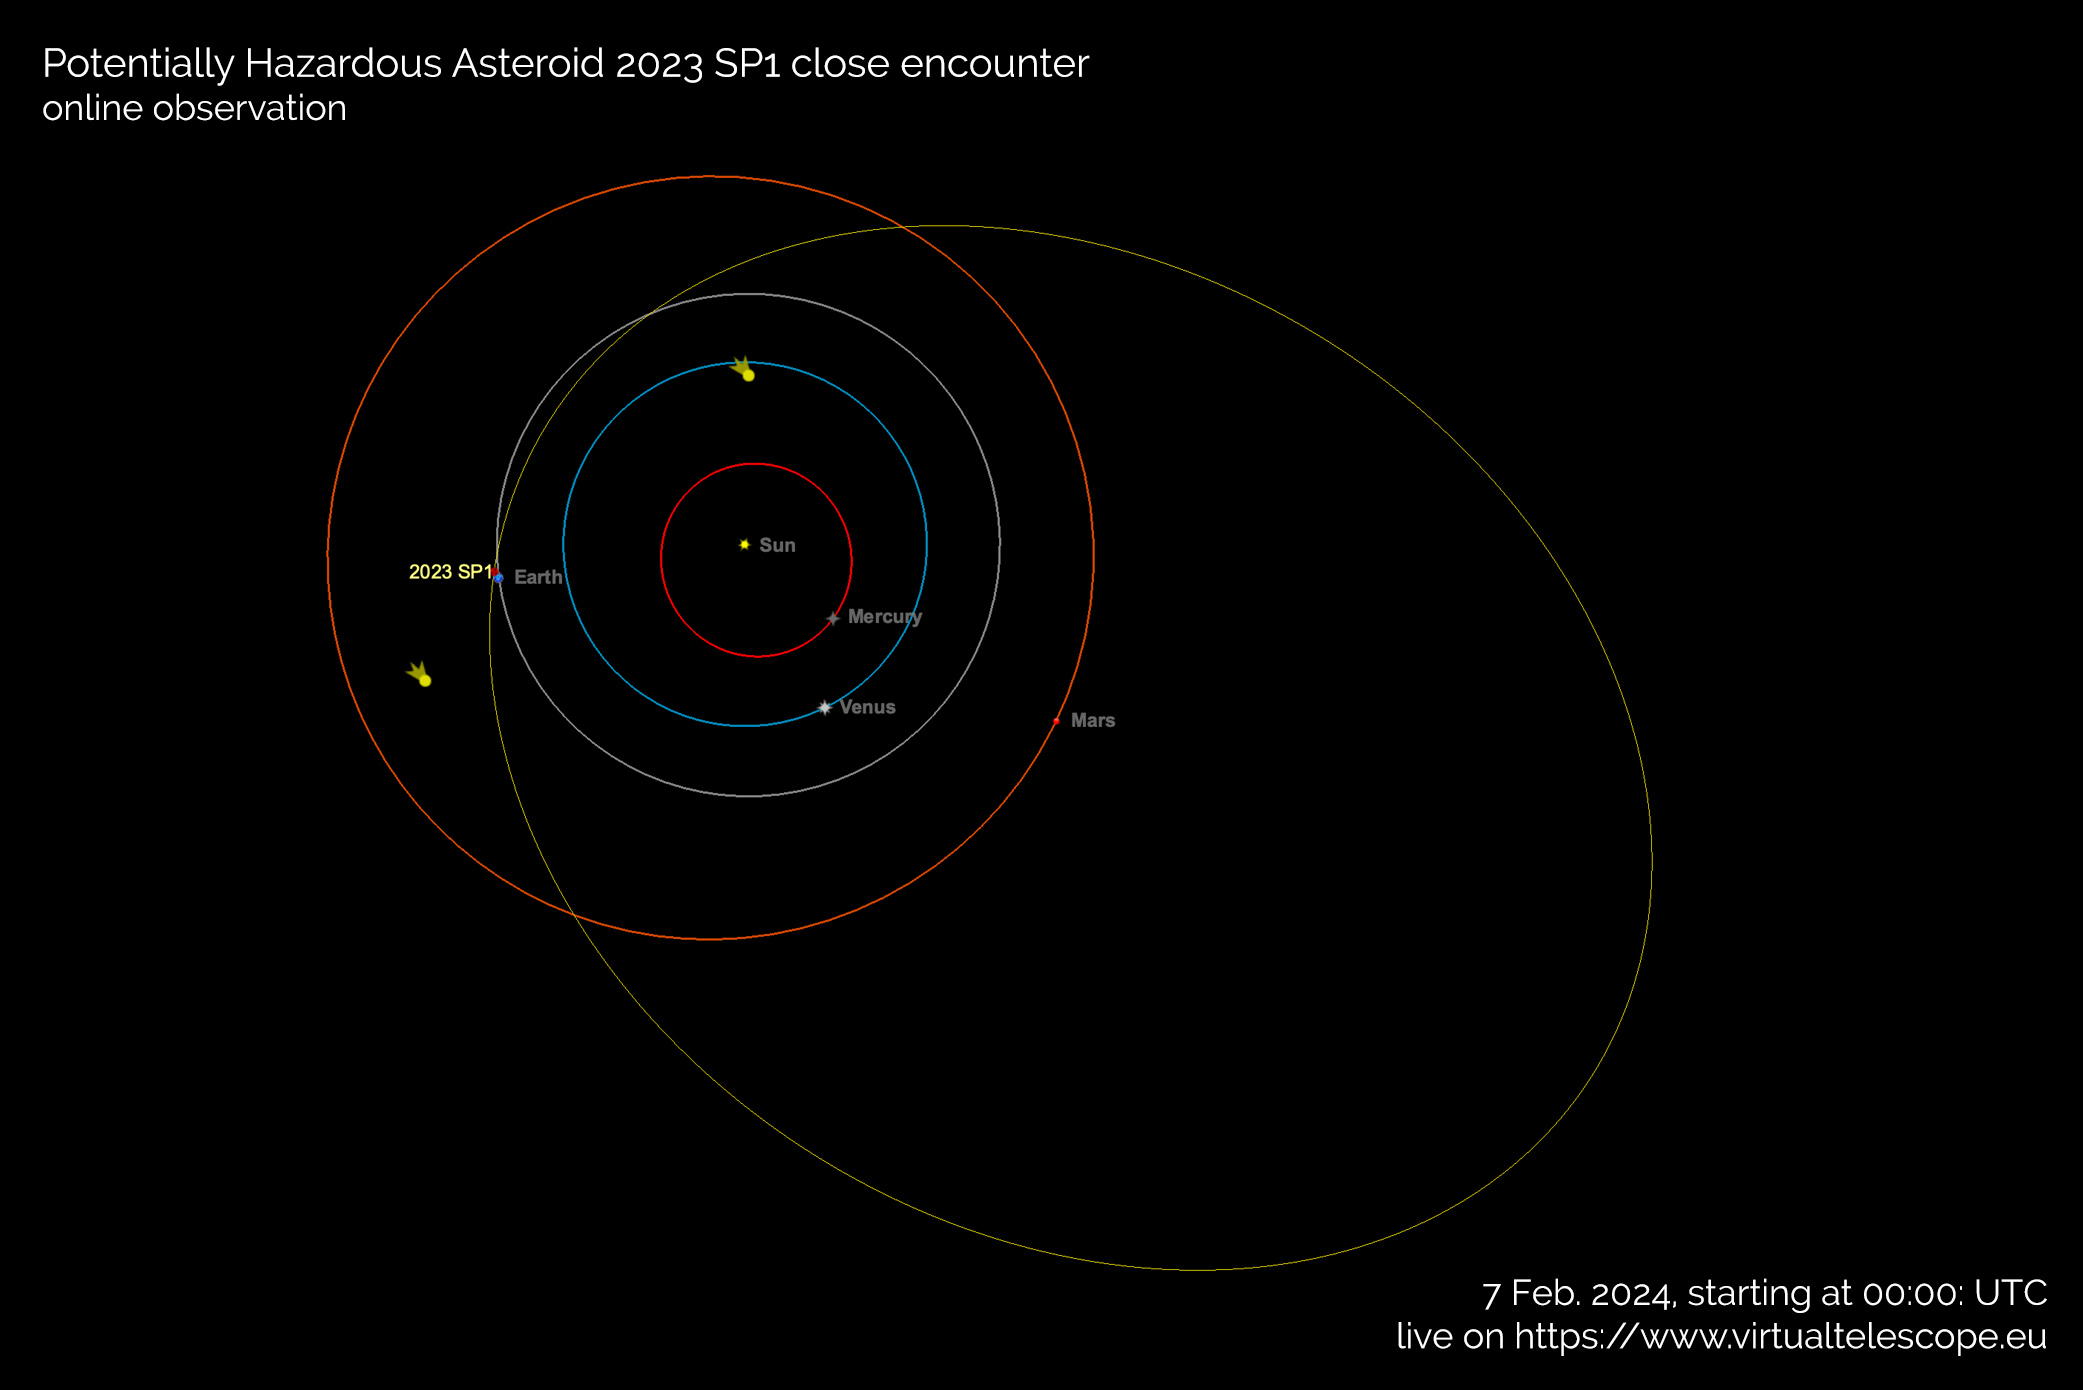 Potentially Hazardous Asteroid 2023 SP1 close encounter: poster of the event.